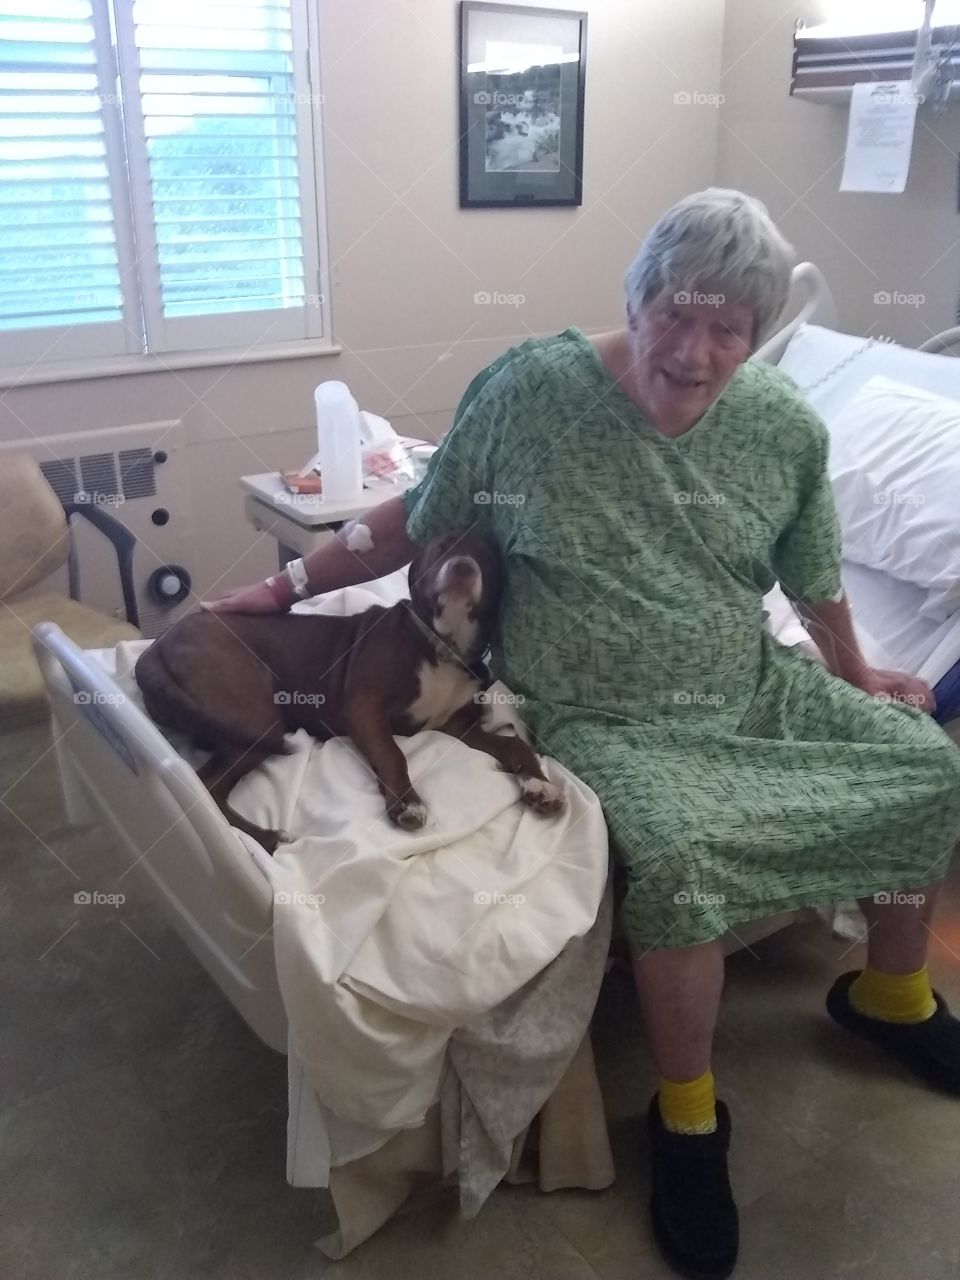 Dog goes into hospital to see patient, healing patients quicker.